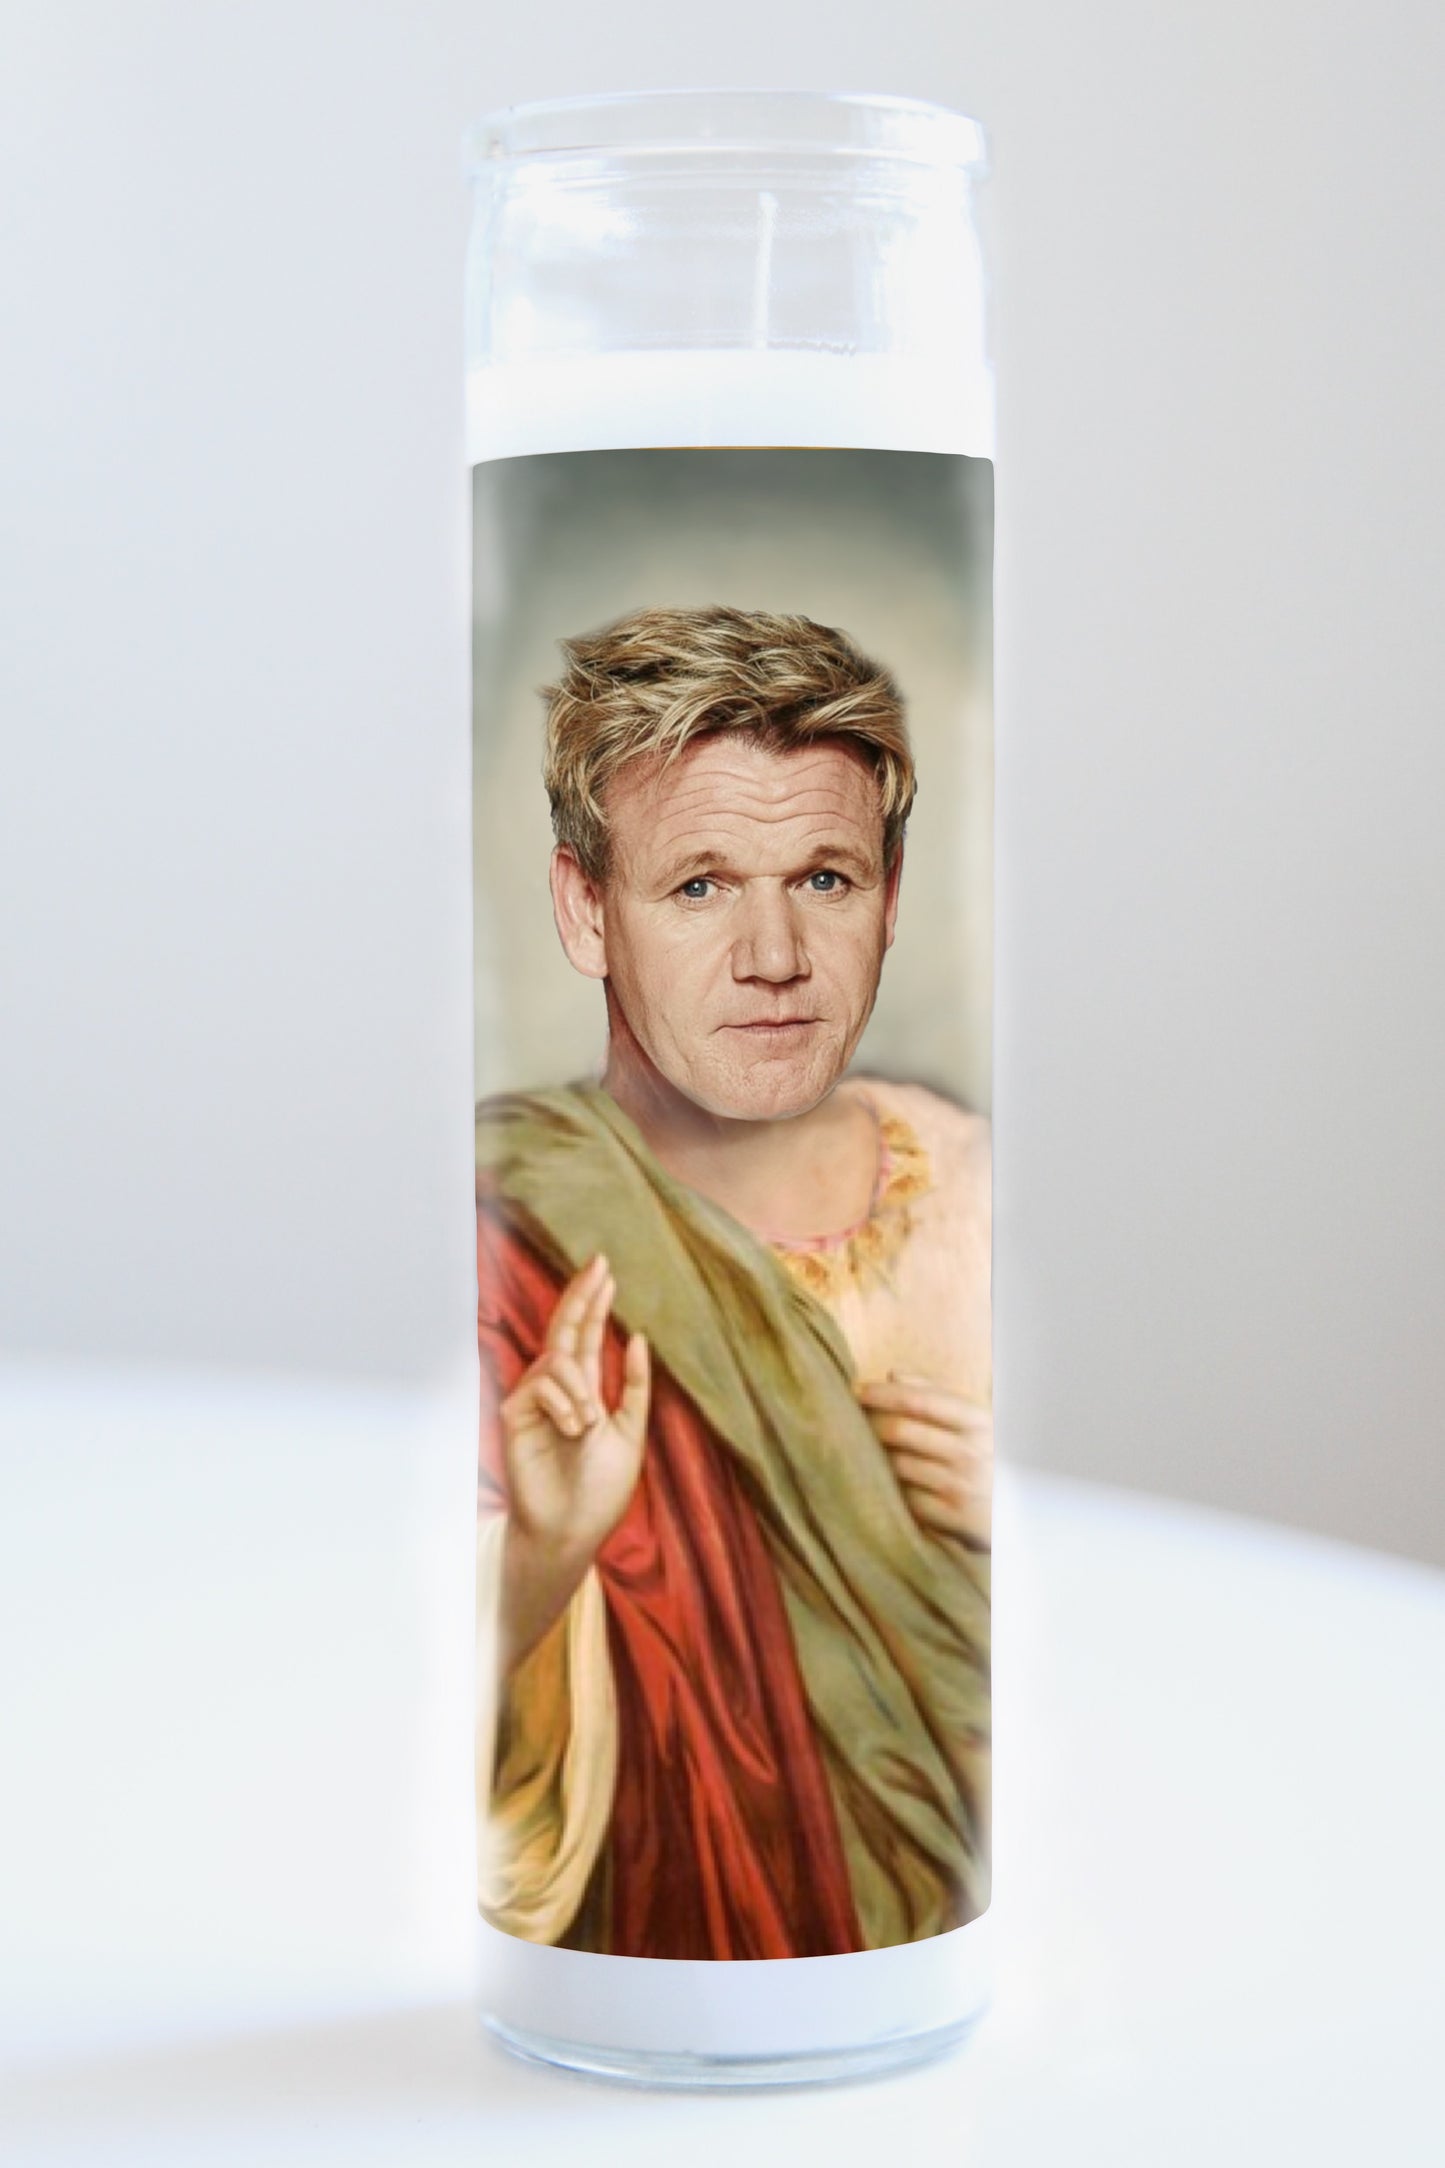 Gordon Ramsay Red/Green Robe Candle